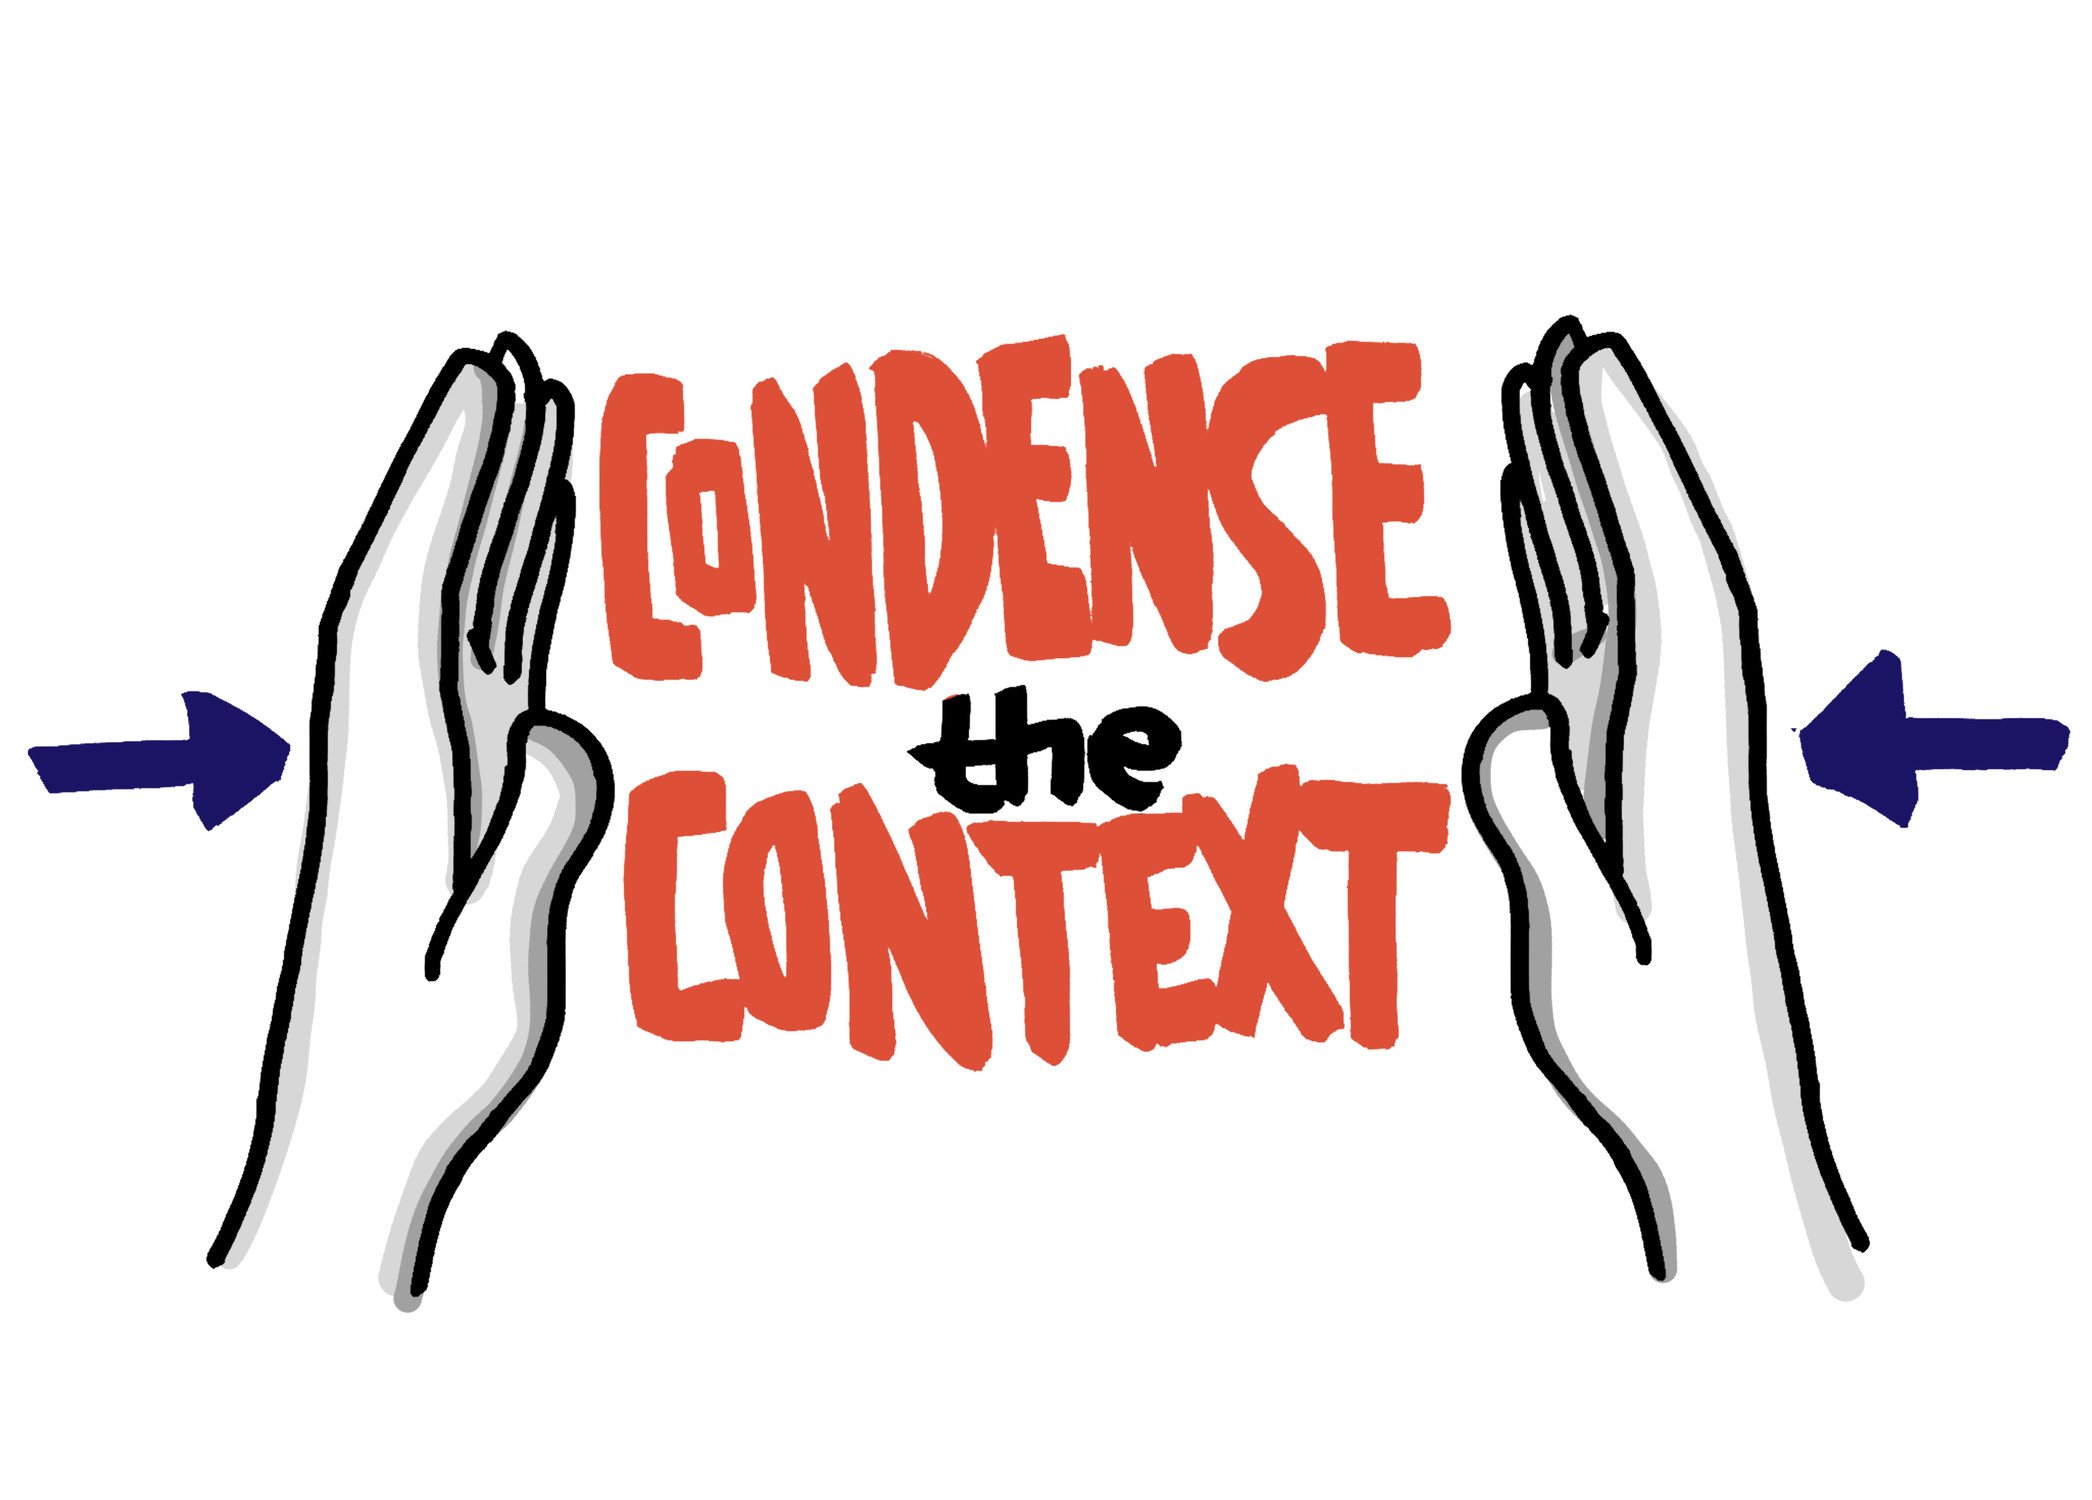 Sketch graphic of hands around text that reads "condense the content"